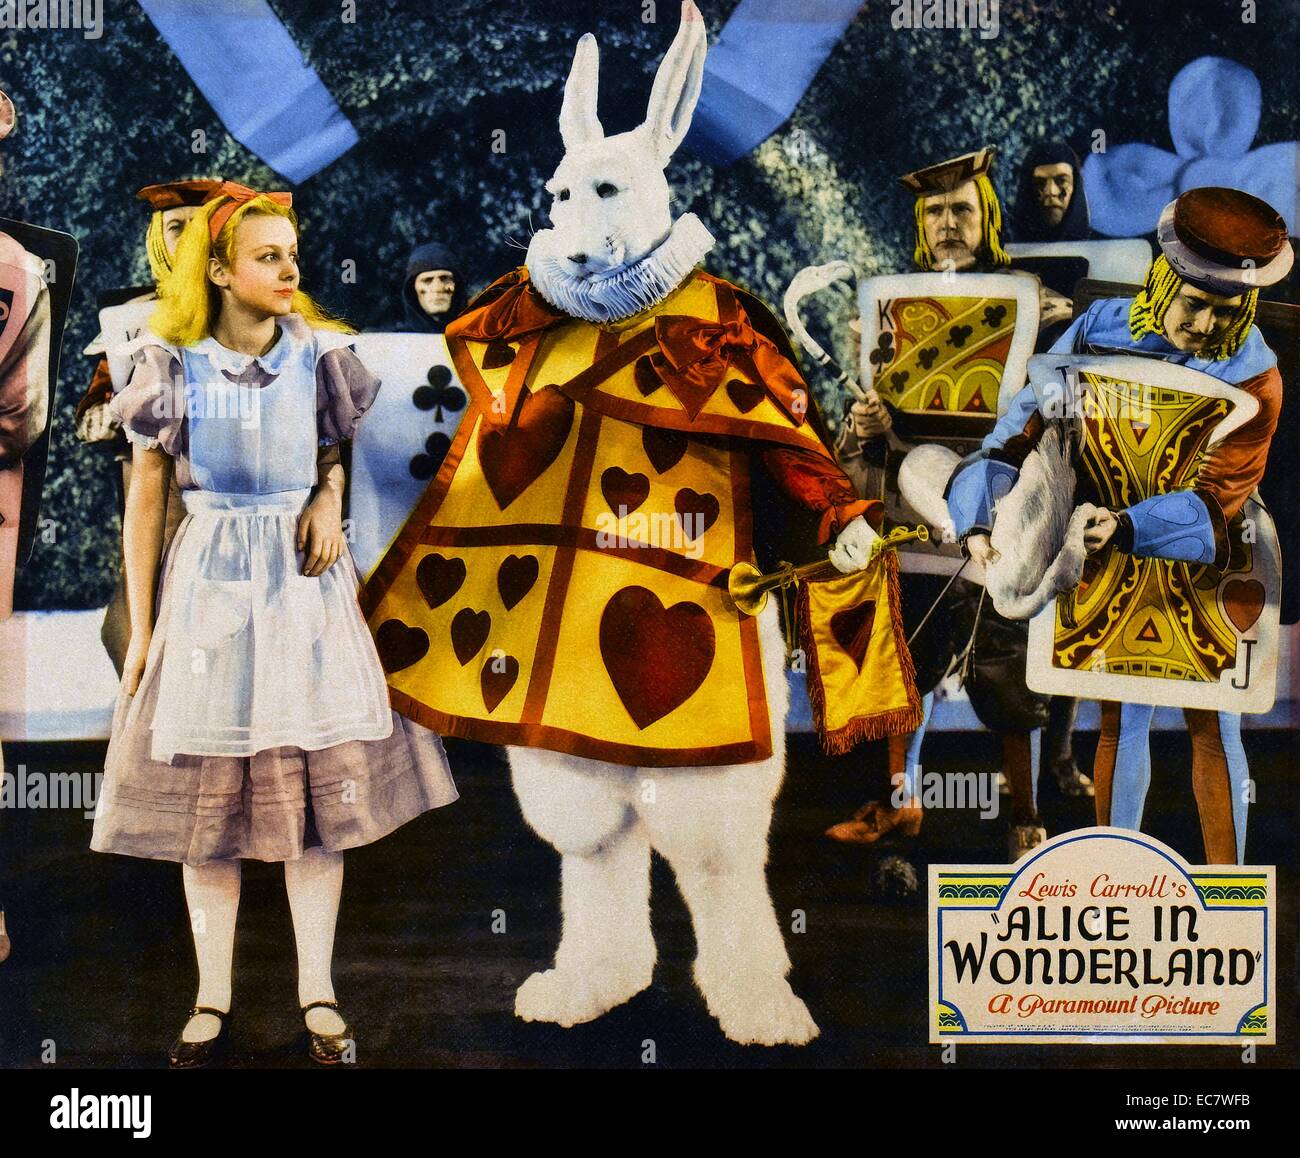 Alice in Wonderland is a 1933 film version of the famous Alice novels of Lewis Carroll. It is all live-action, except for the Walrus and The Carpenter sequence, which was animated by Harman-Ising Studio. Starring Charlotte Henry and W.C. Fields. Stock Photo